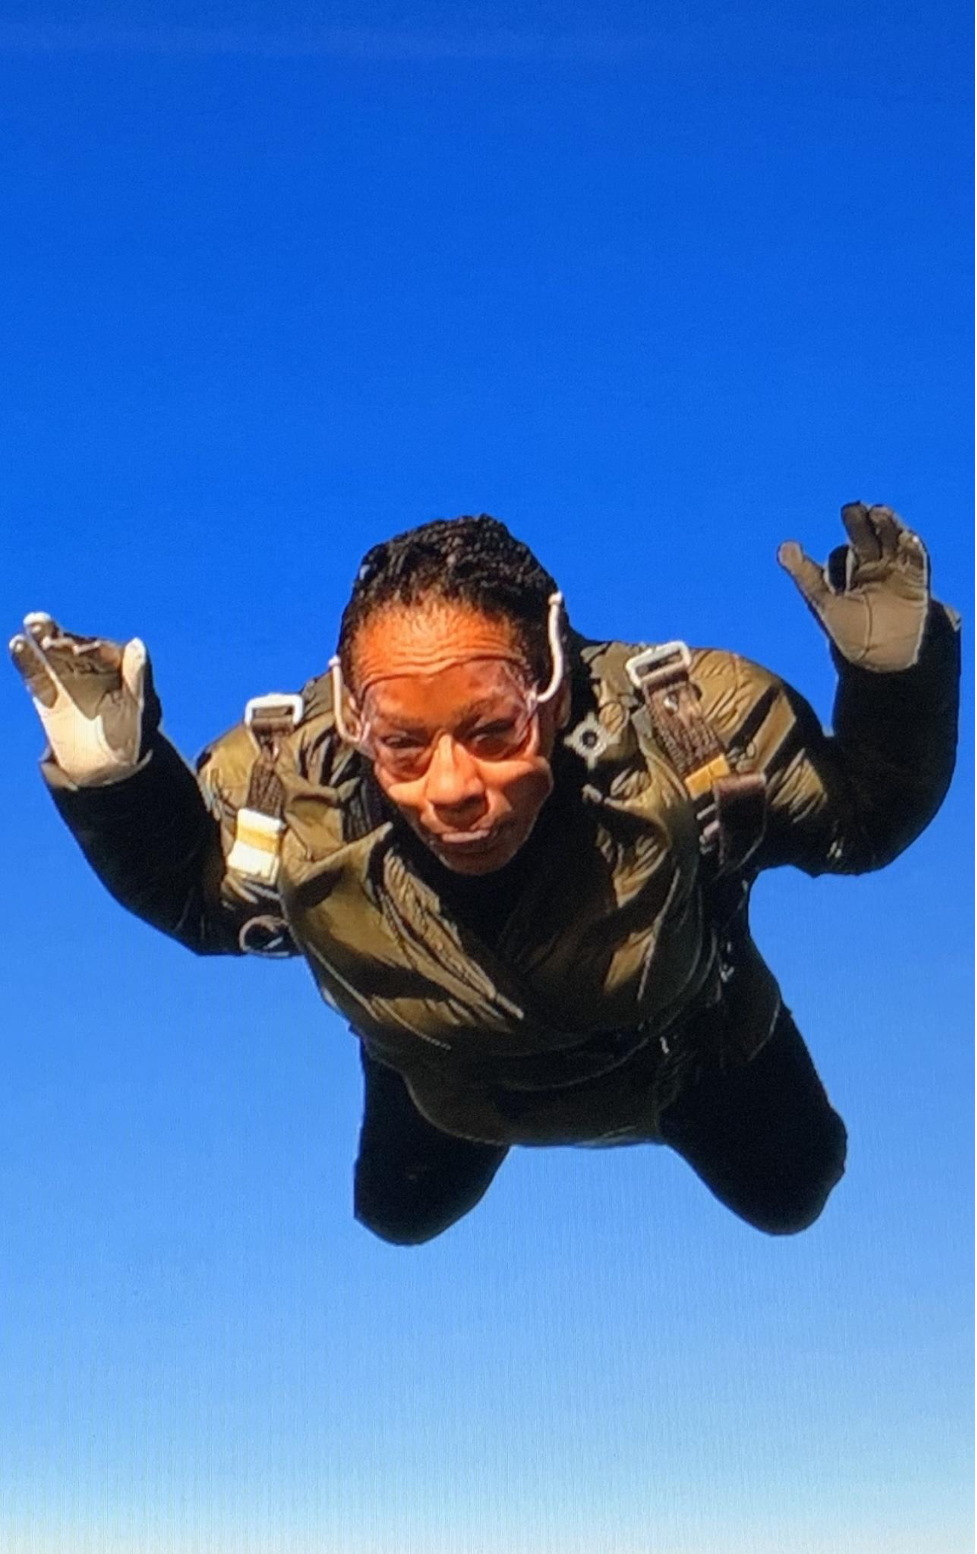 A video still of a woman skydiving.